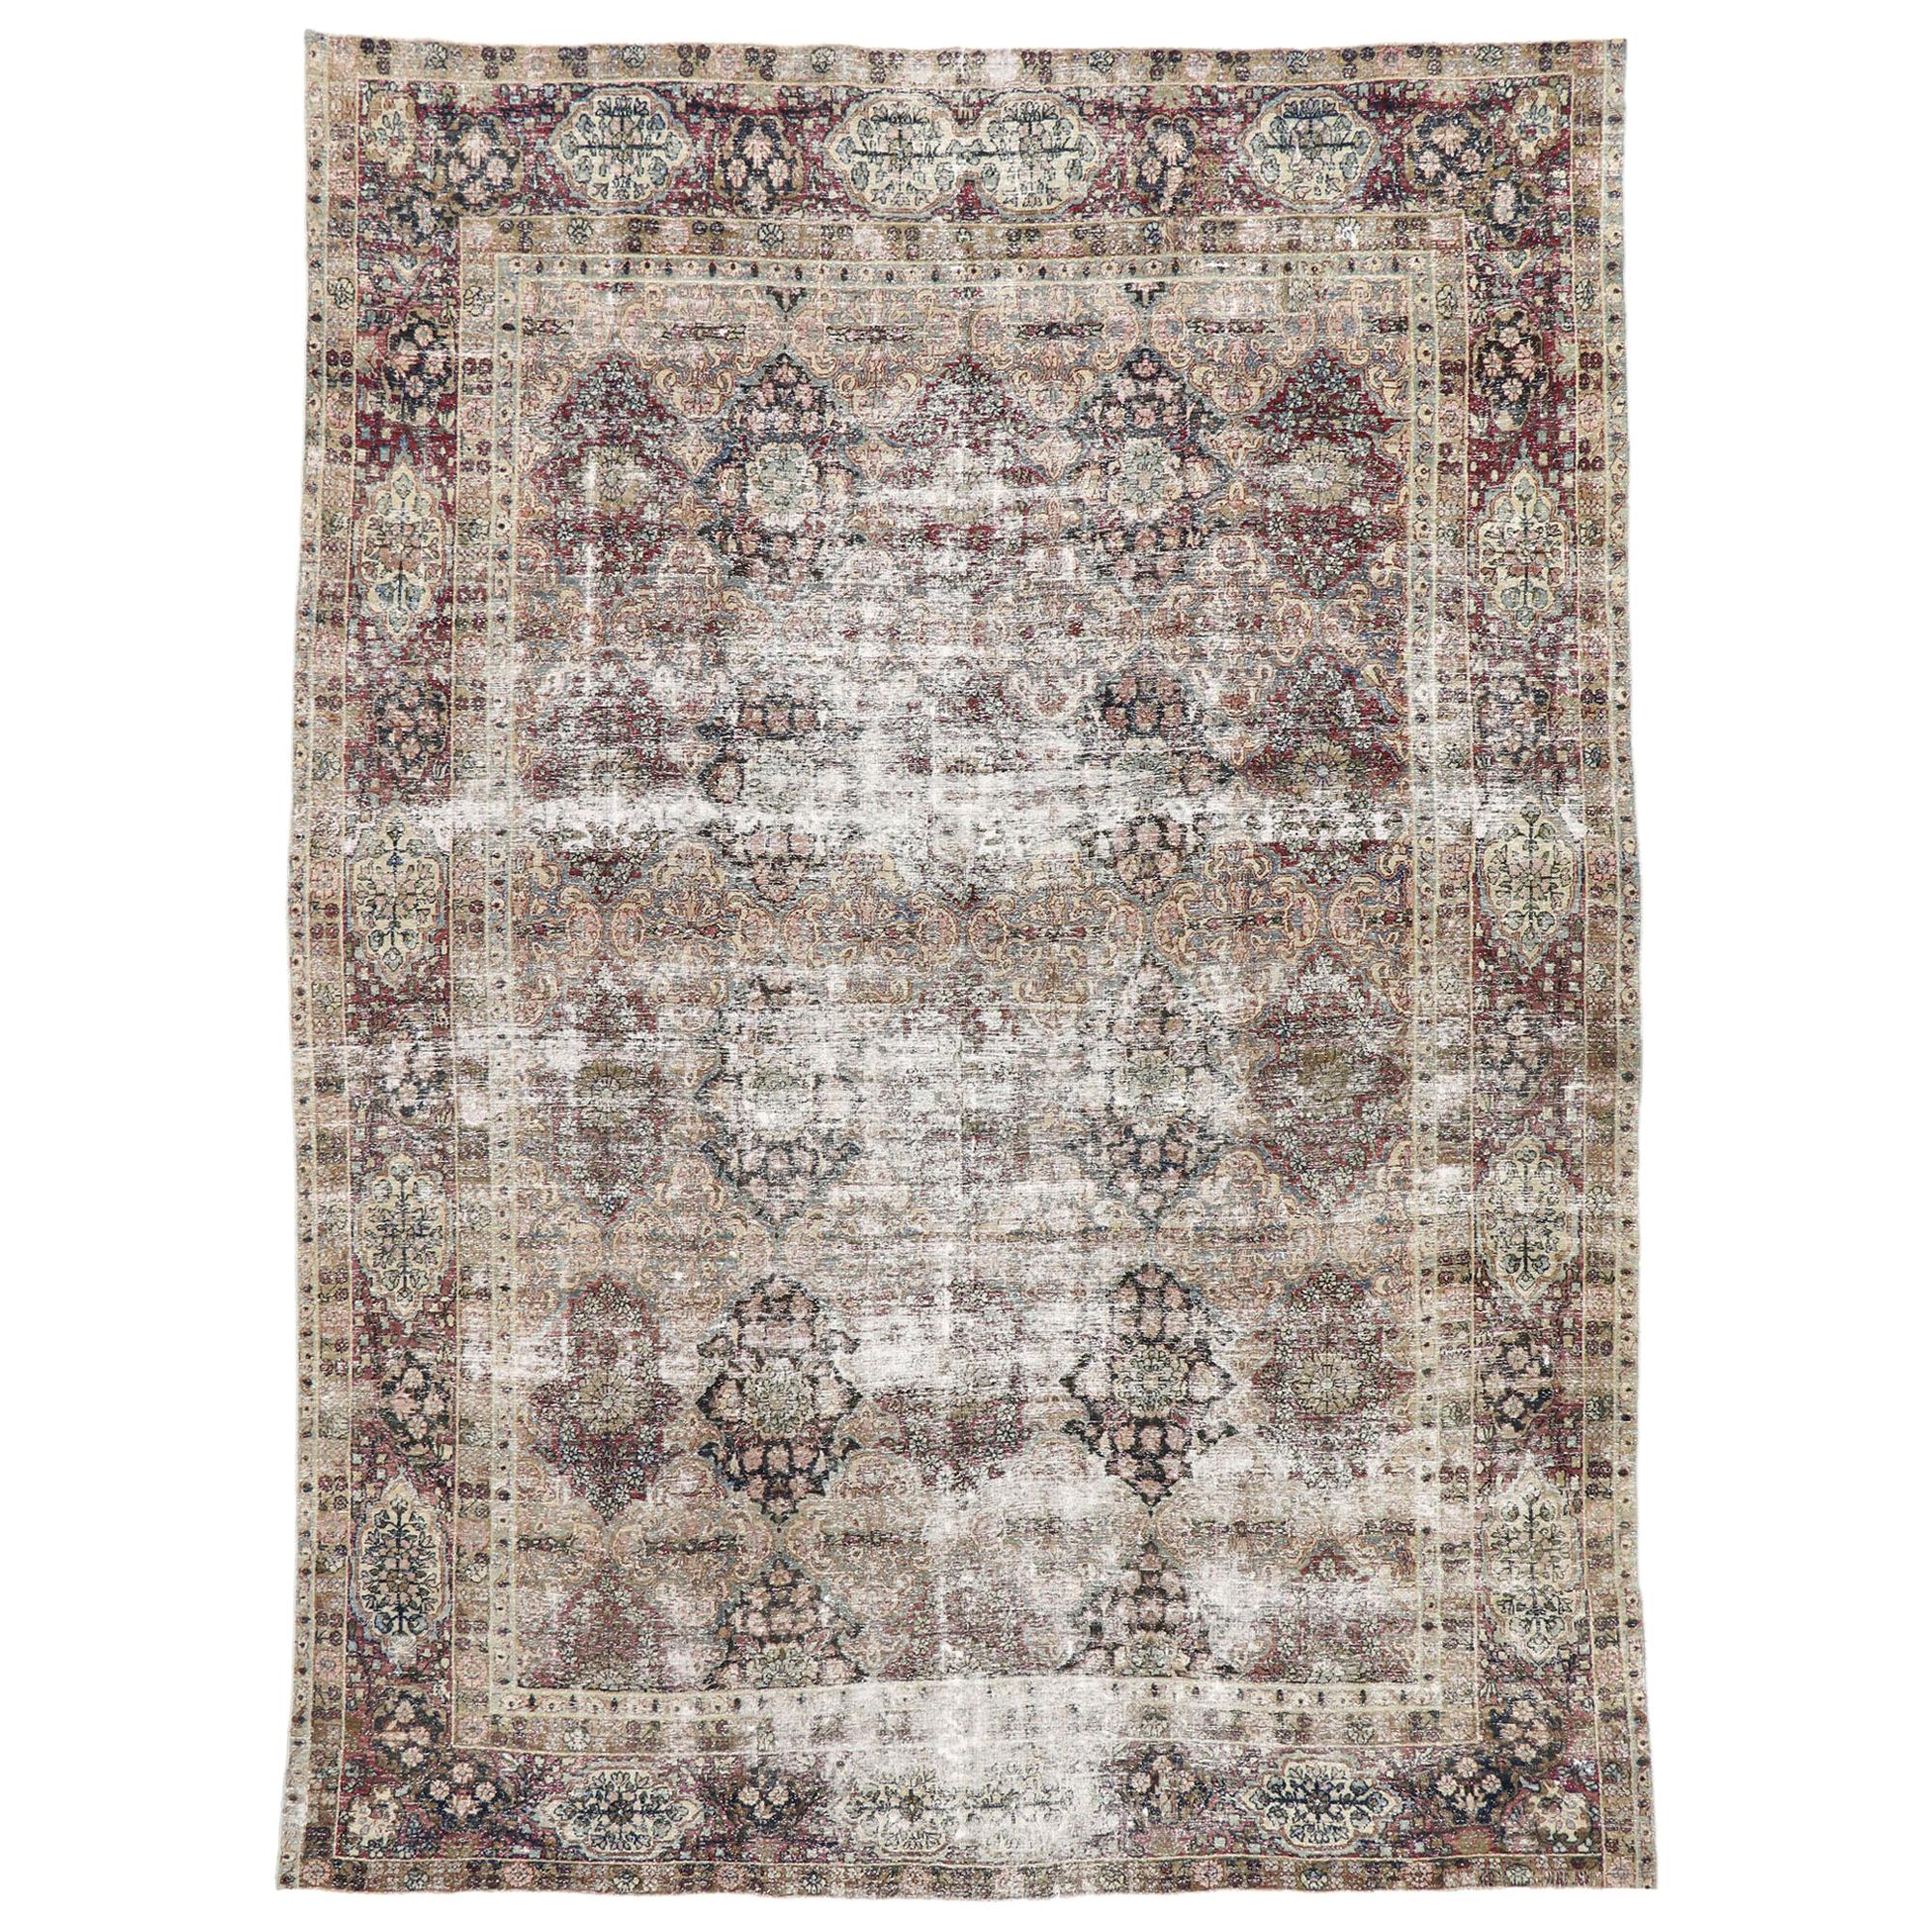 Distressed Antique Persian Kerman Rug with Rustic Renaissance Style For Sale